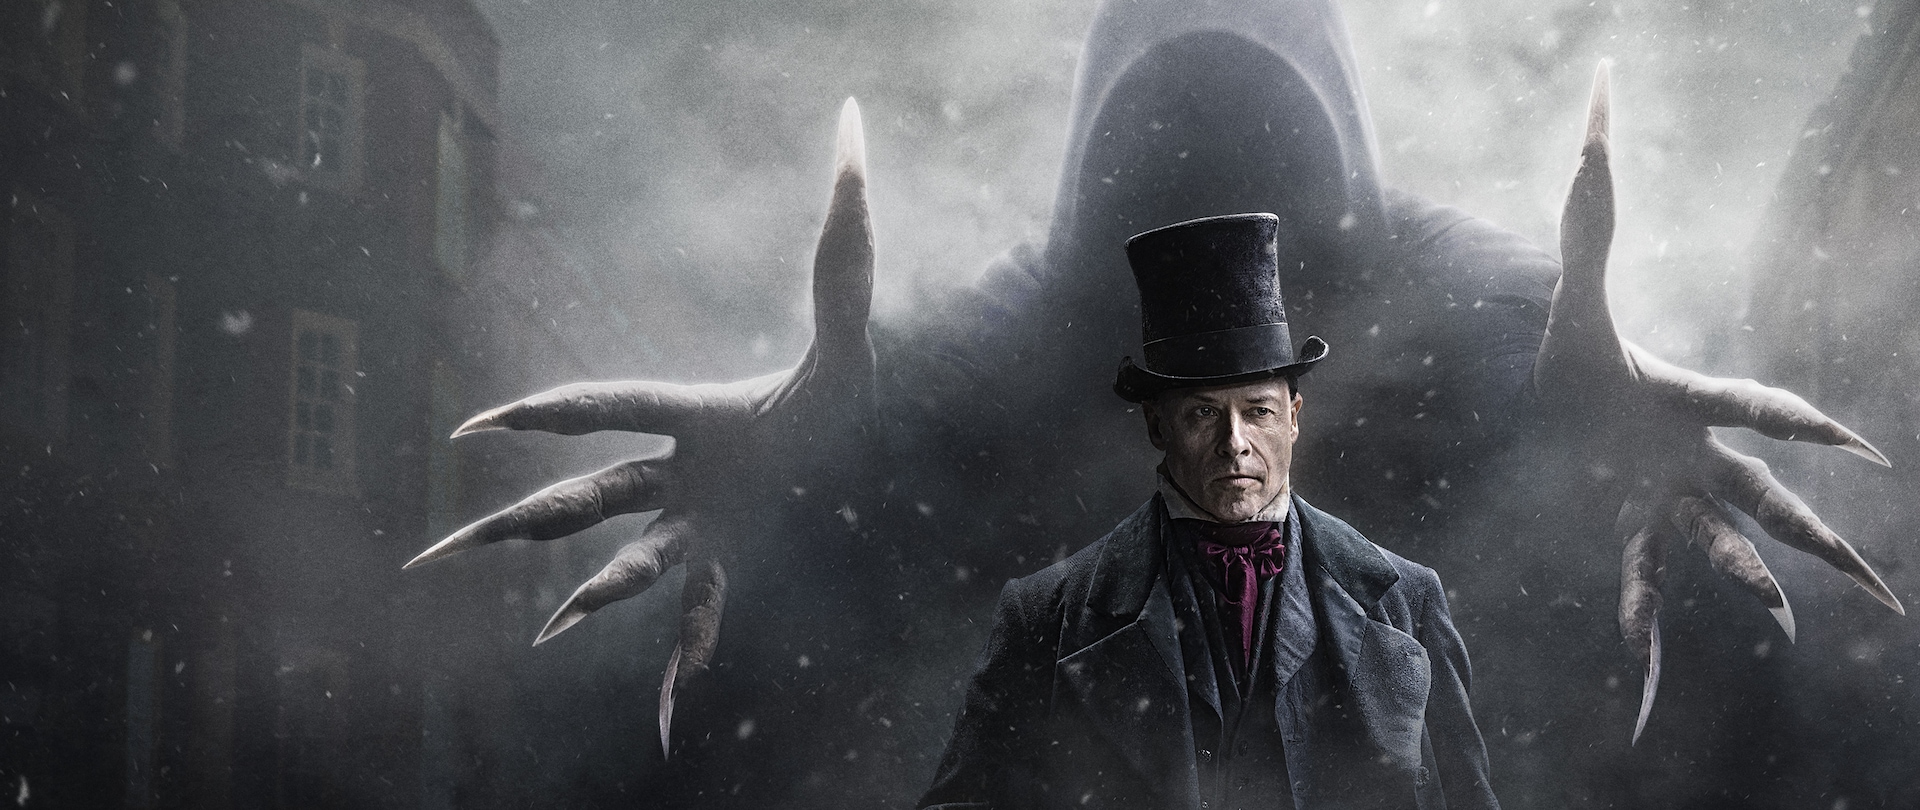 Dark shrouded spirit of Christmas Future with hands reaching out on either side of Ebenezer Scrooge dressed in dark clothes